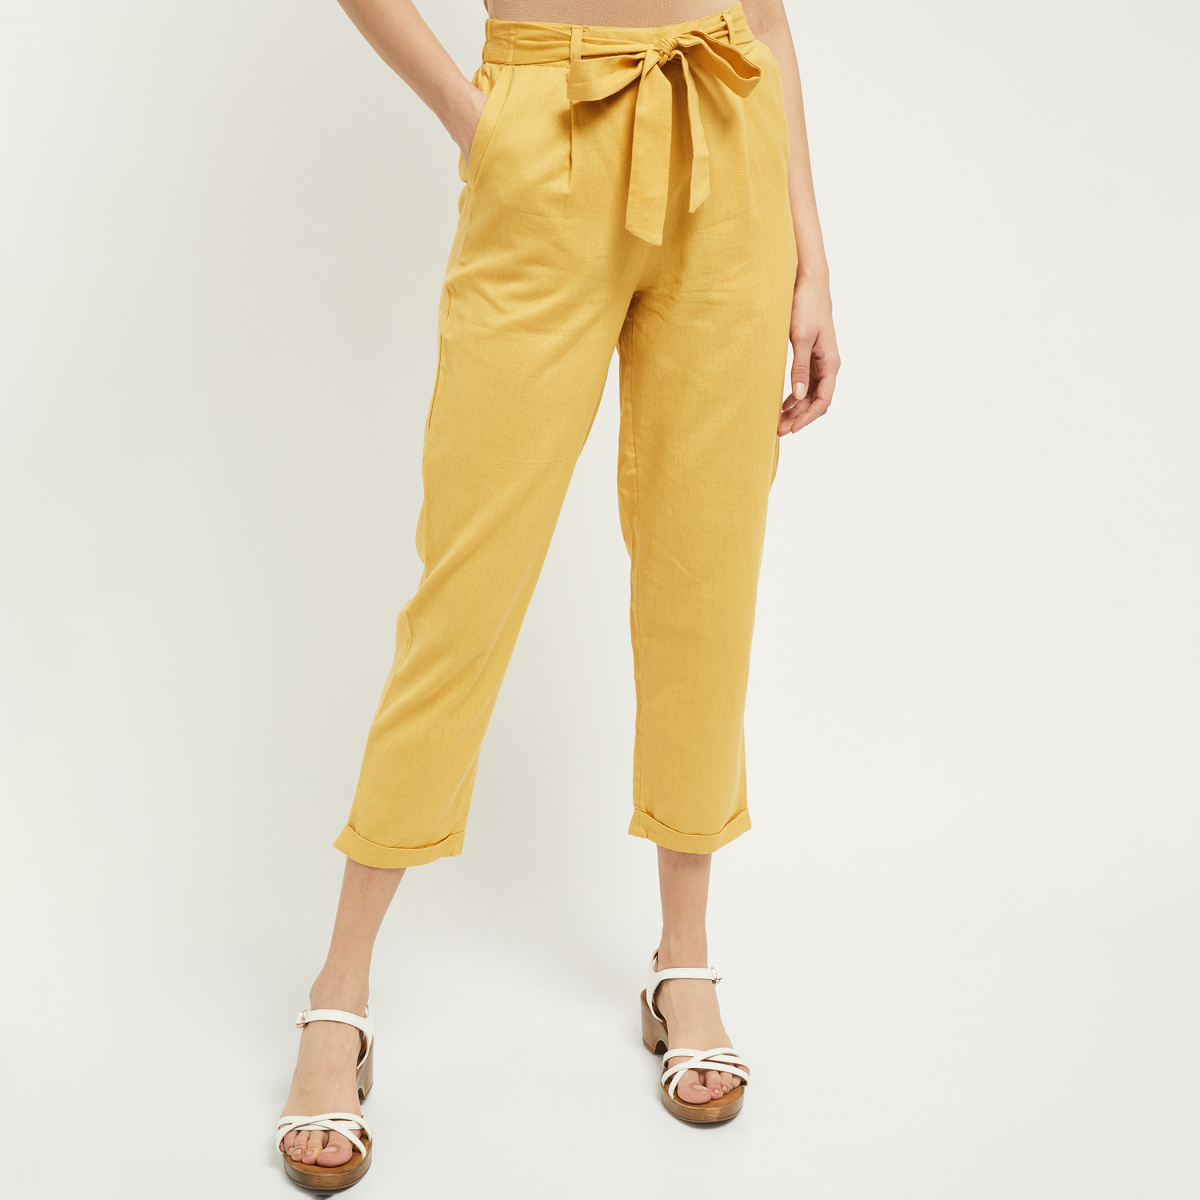 Sky blue trousers with tie up detail and one shoulder top – Esha Sethi  Thirani